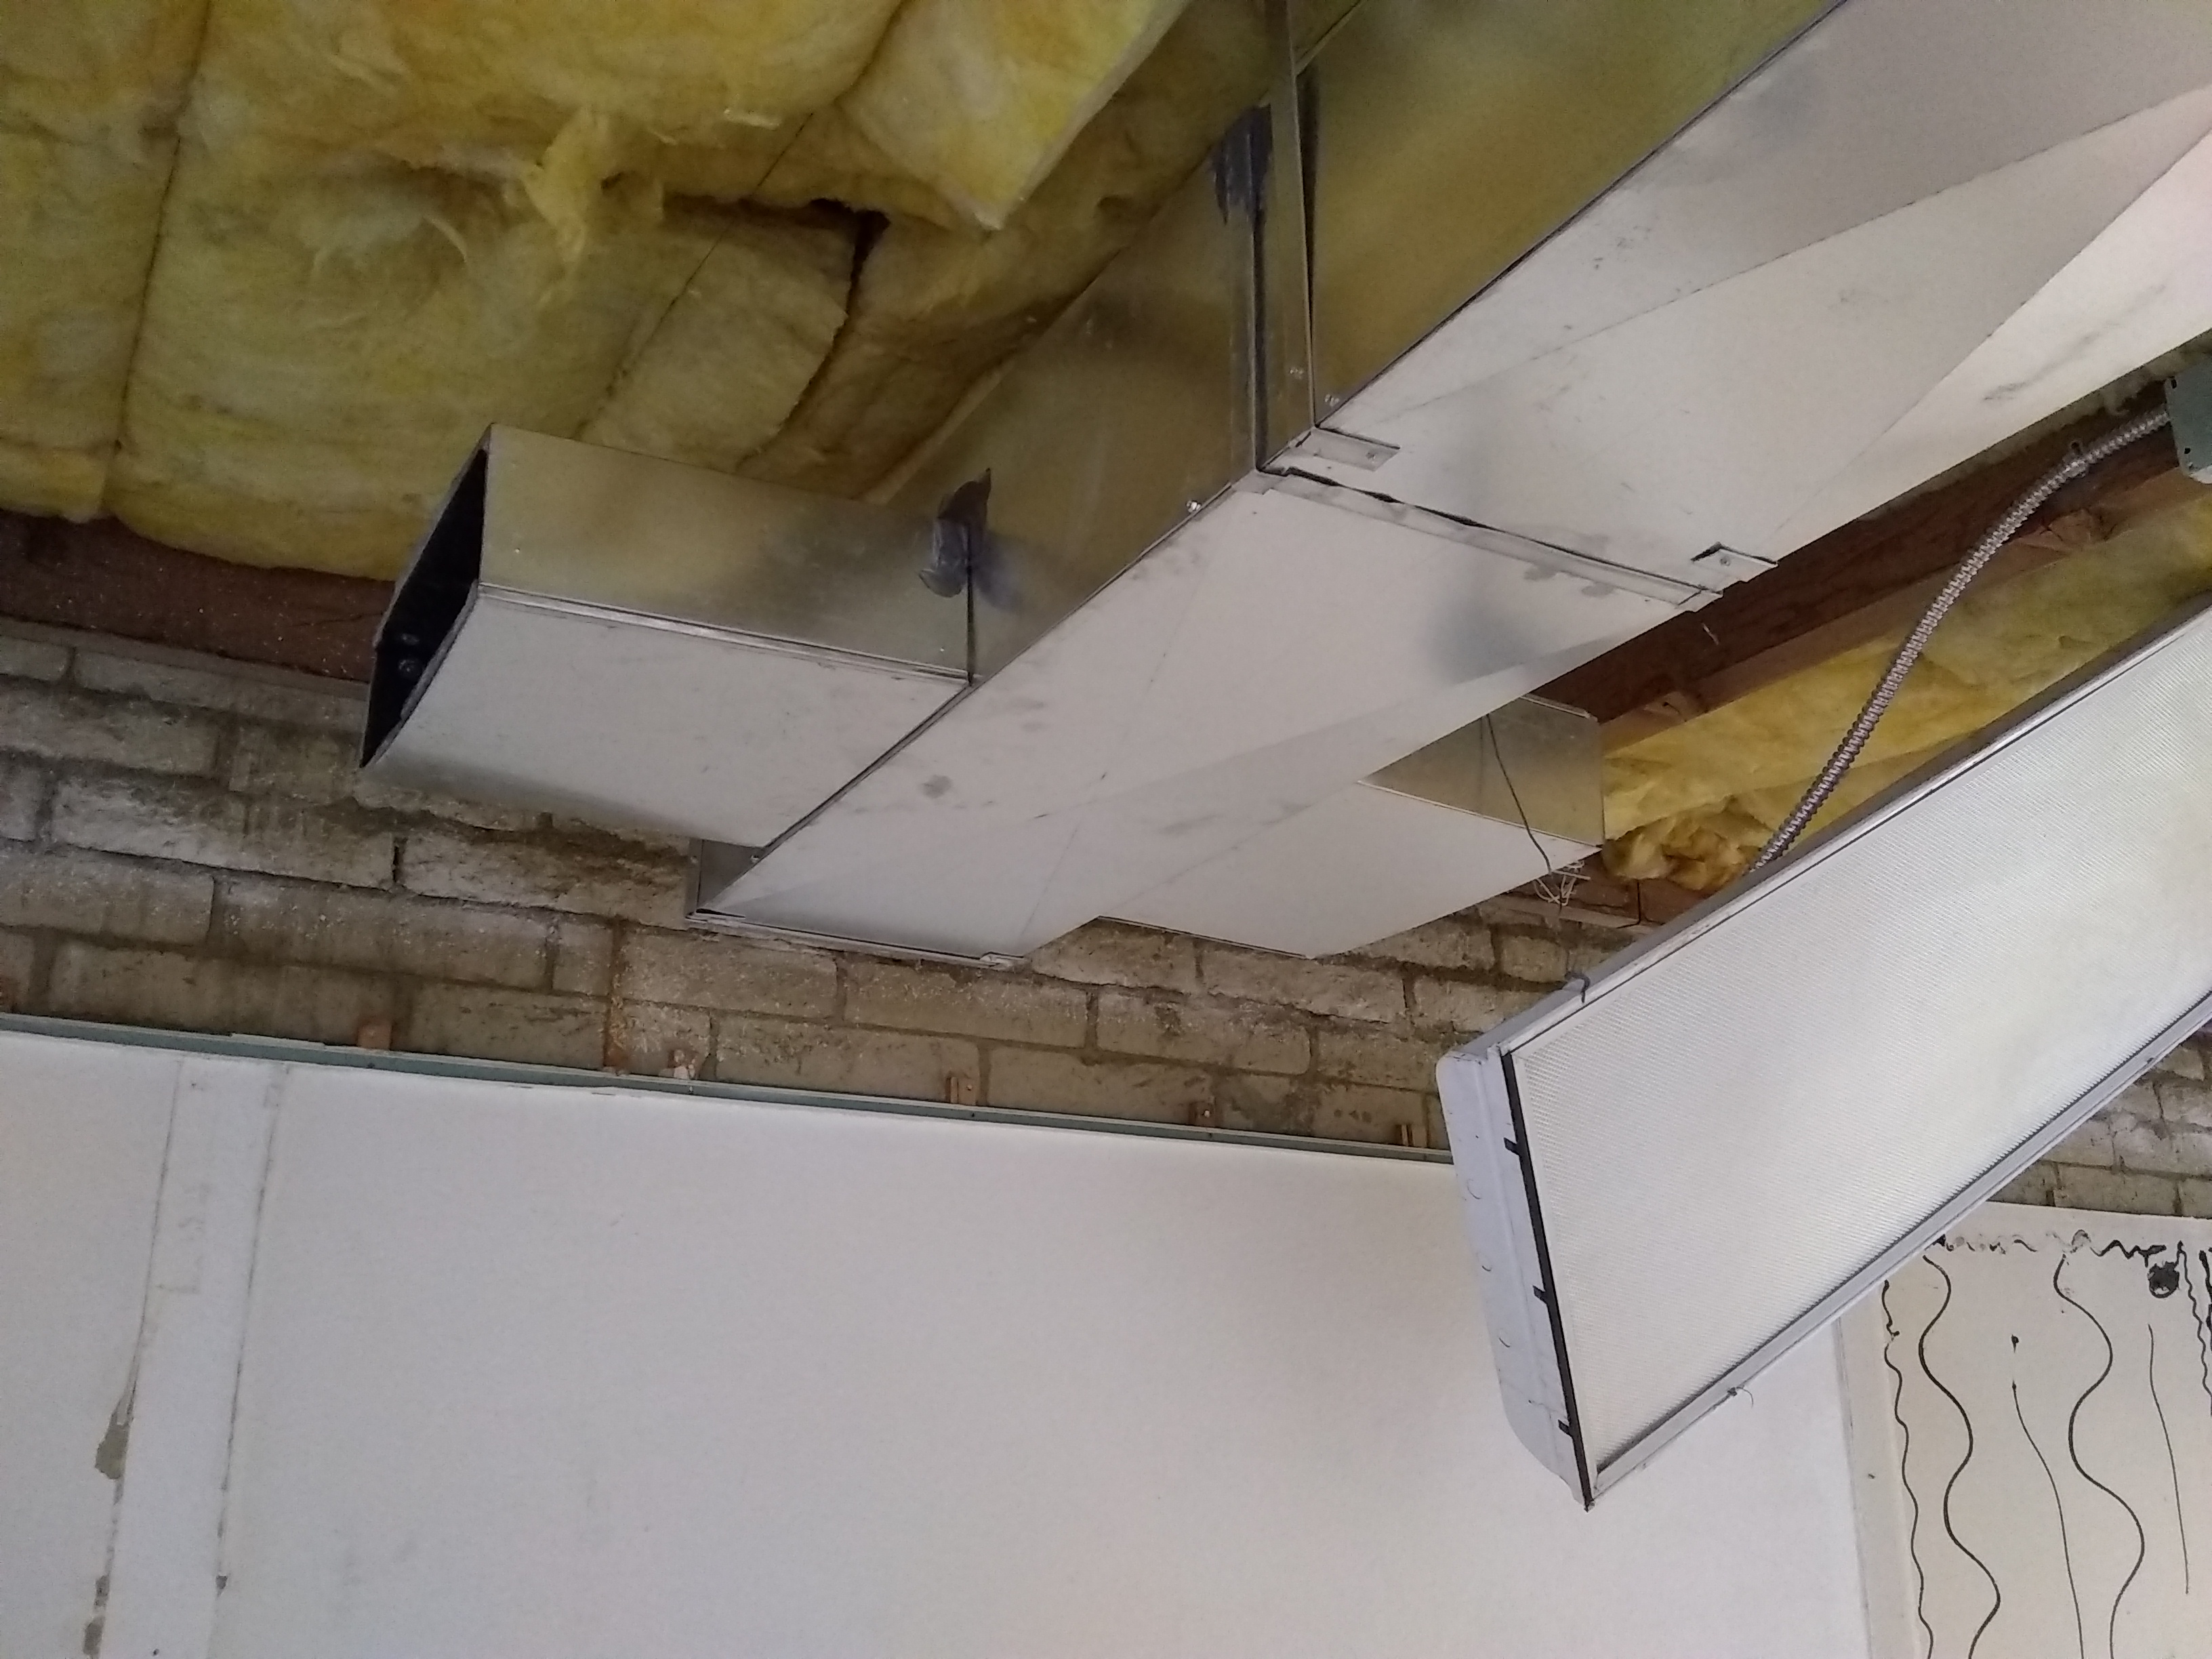 Metal ducting being installed during office remodel